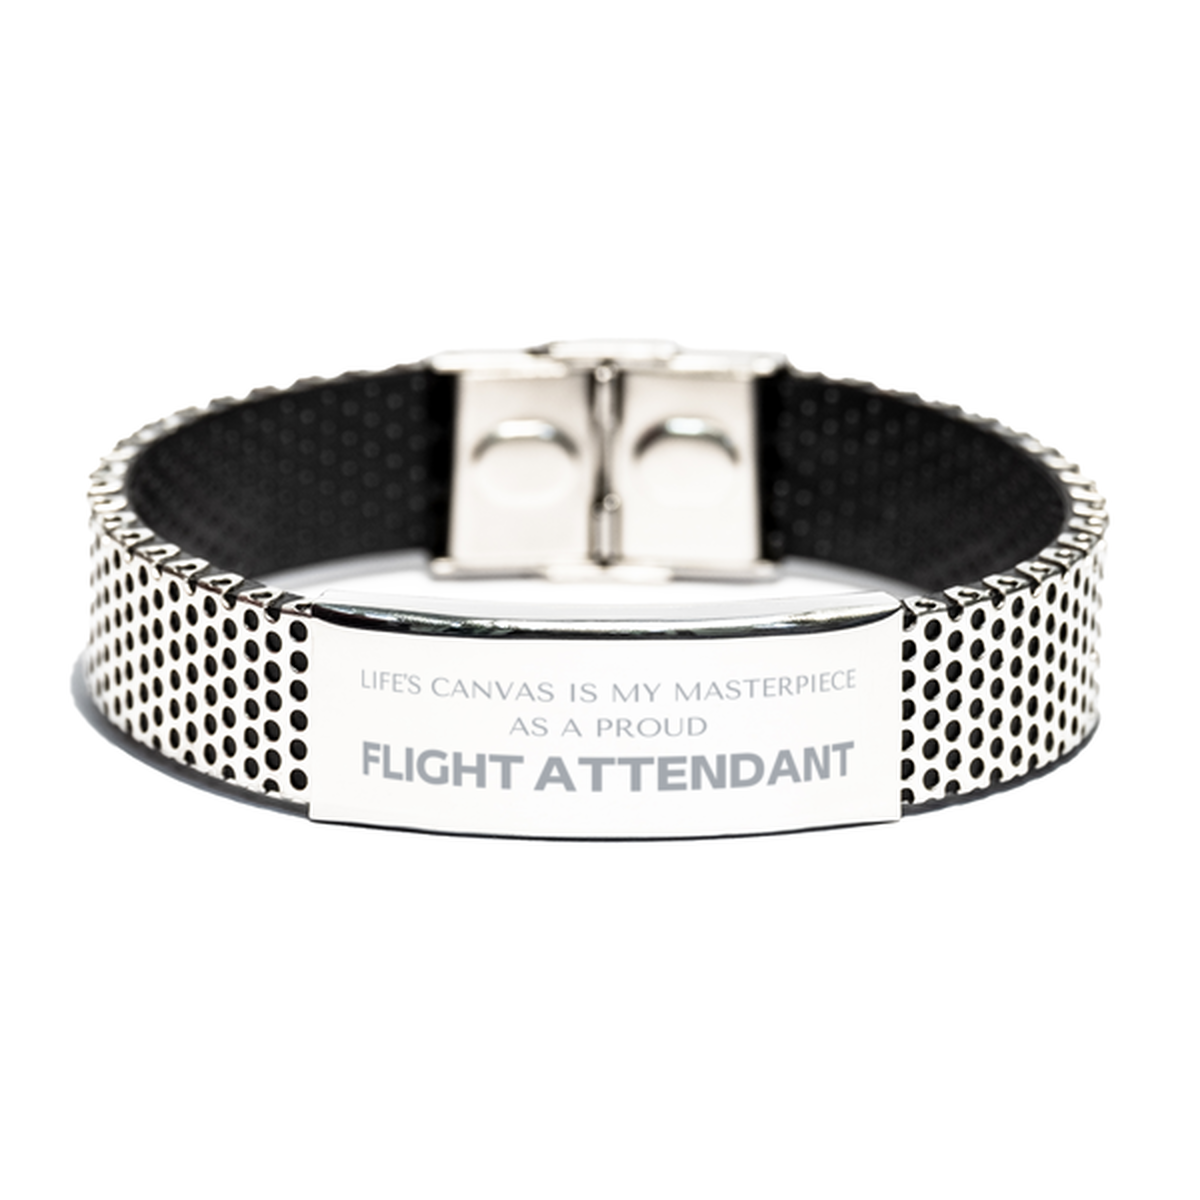 Proud Flight Attendant Gifts, Life's canvas is my masterpiece, Epic Birthday Christmas Unique Stainless Steel Bracelet For Flight Attendant, Coworkers, Men, Women, Friends